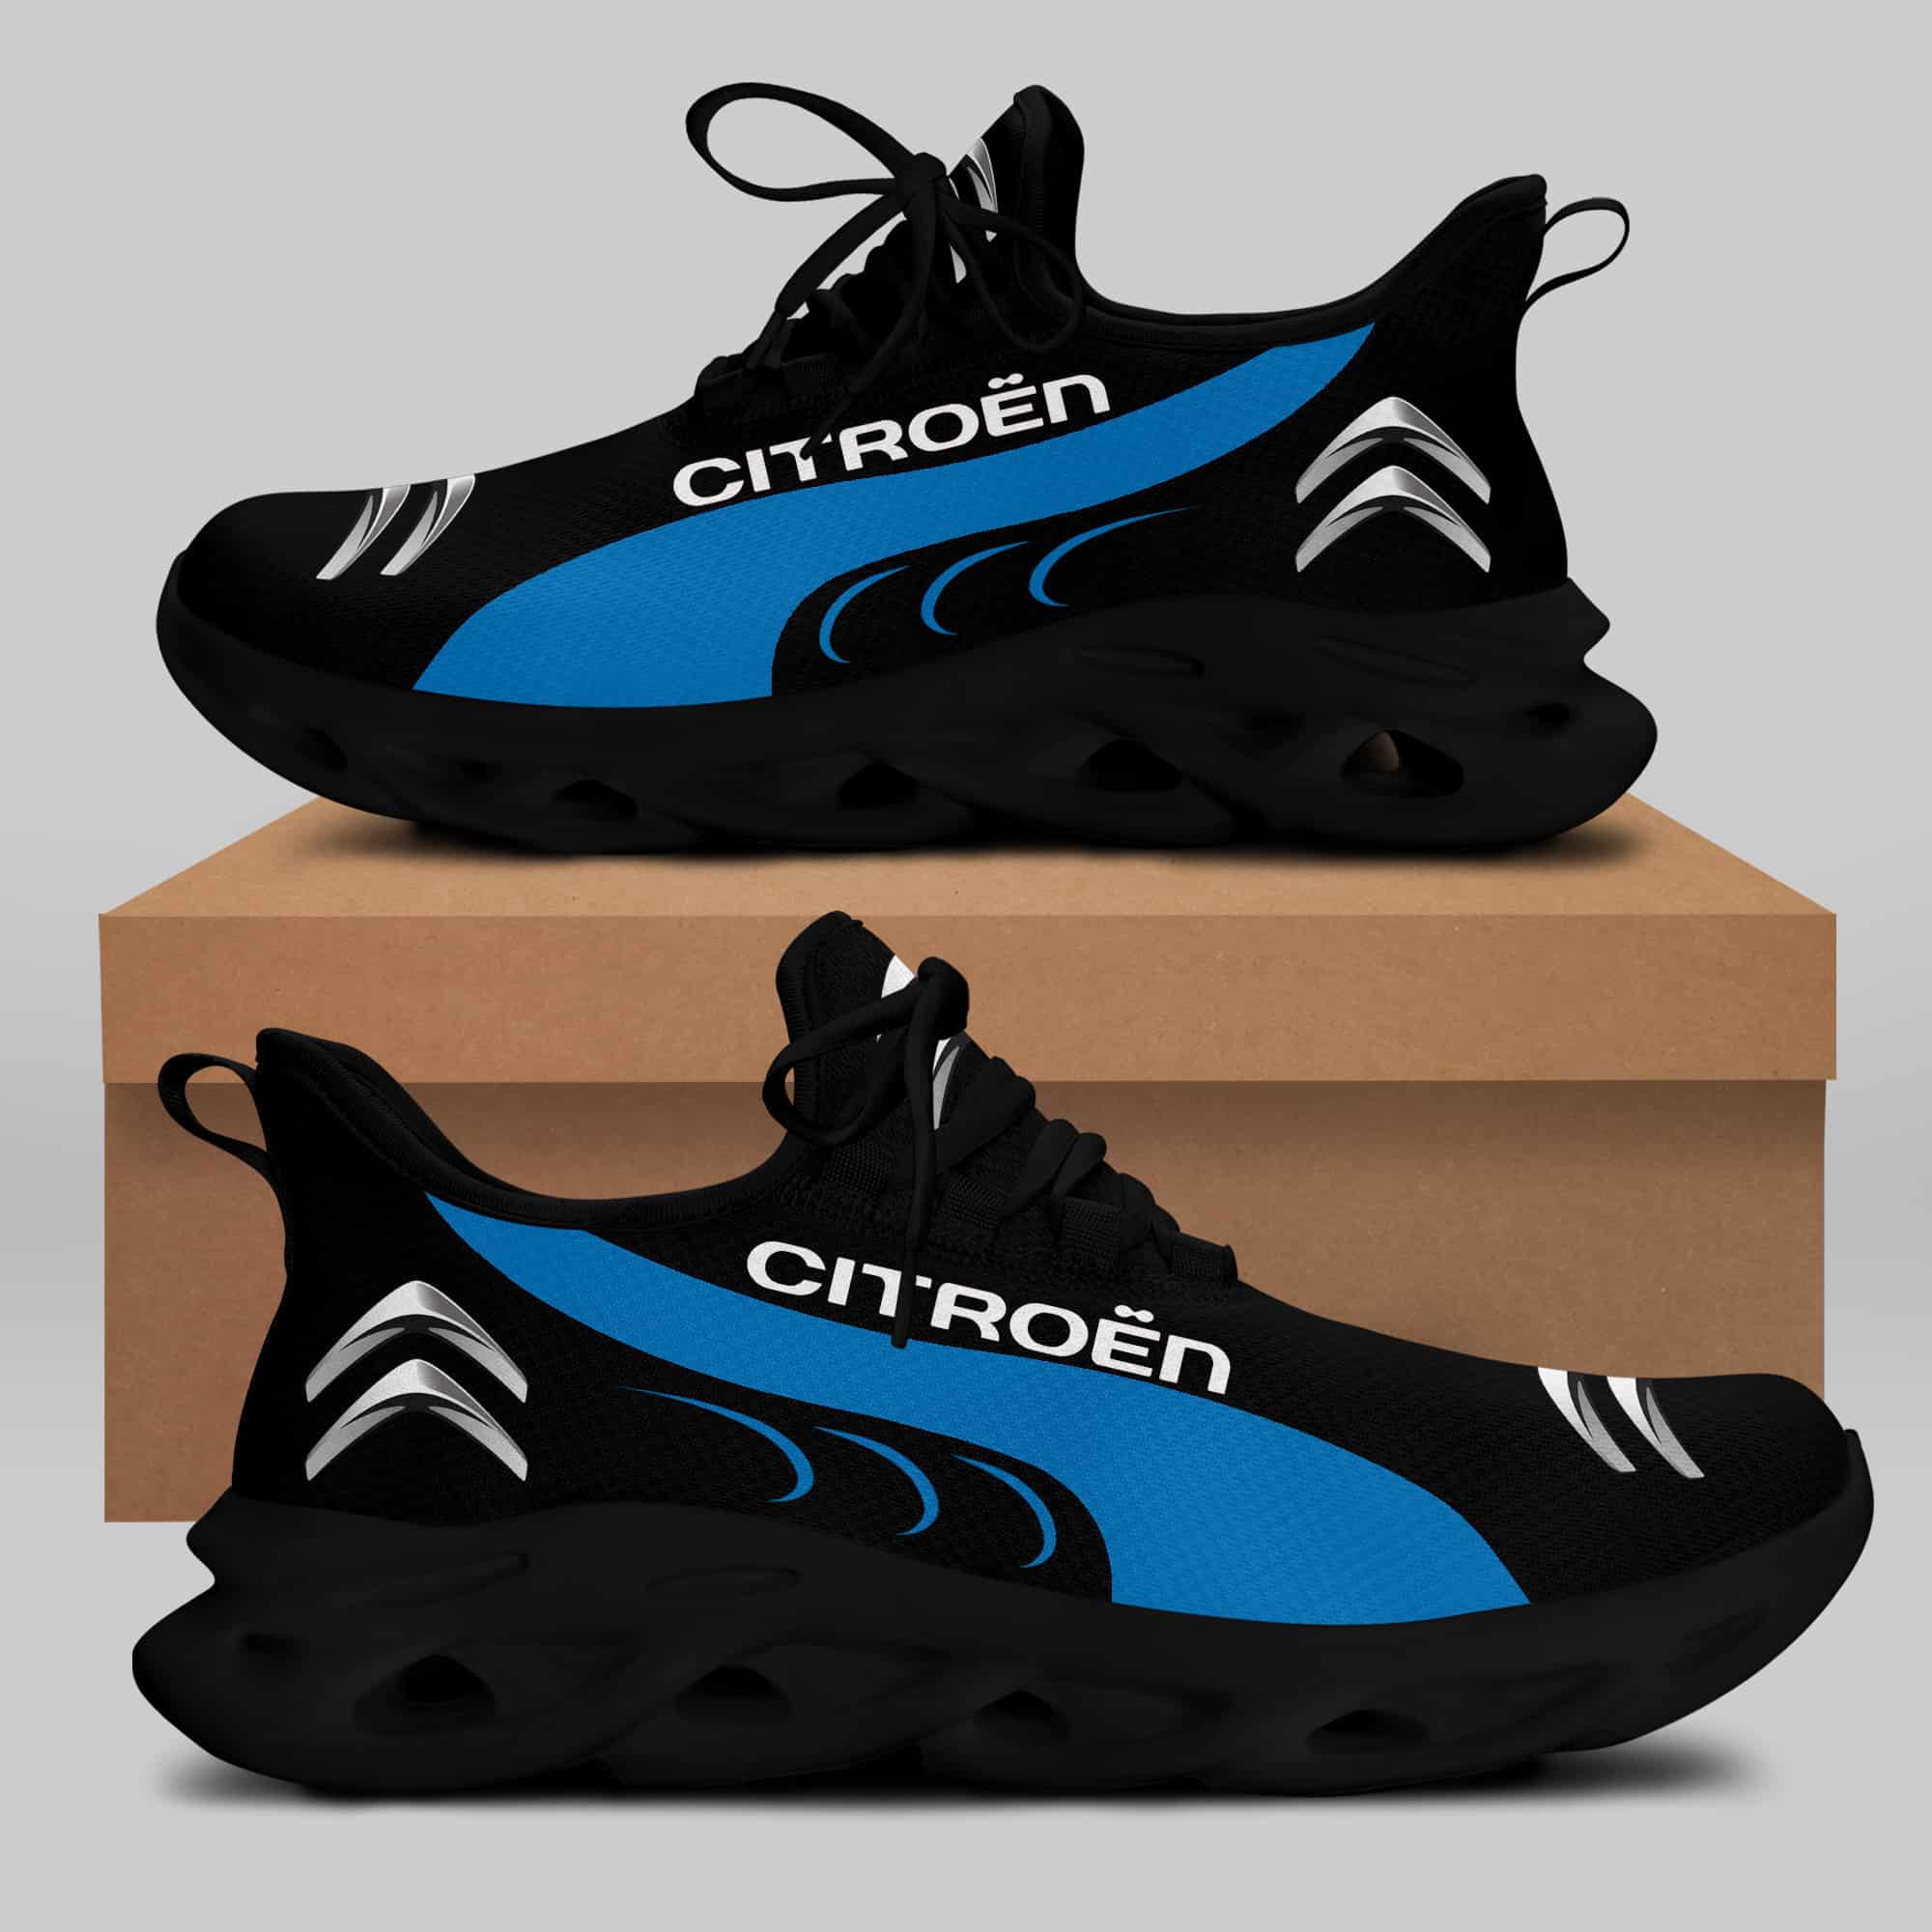 Citroën Running Shoes Max Soul Shoes Sneakers Ver 5 1